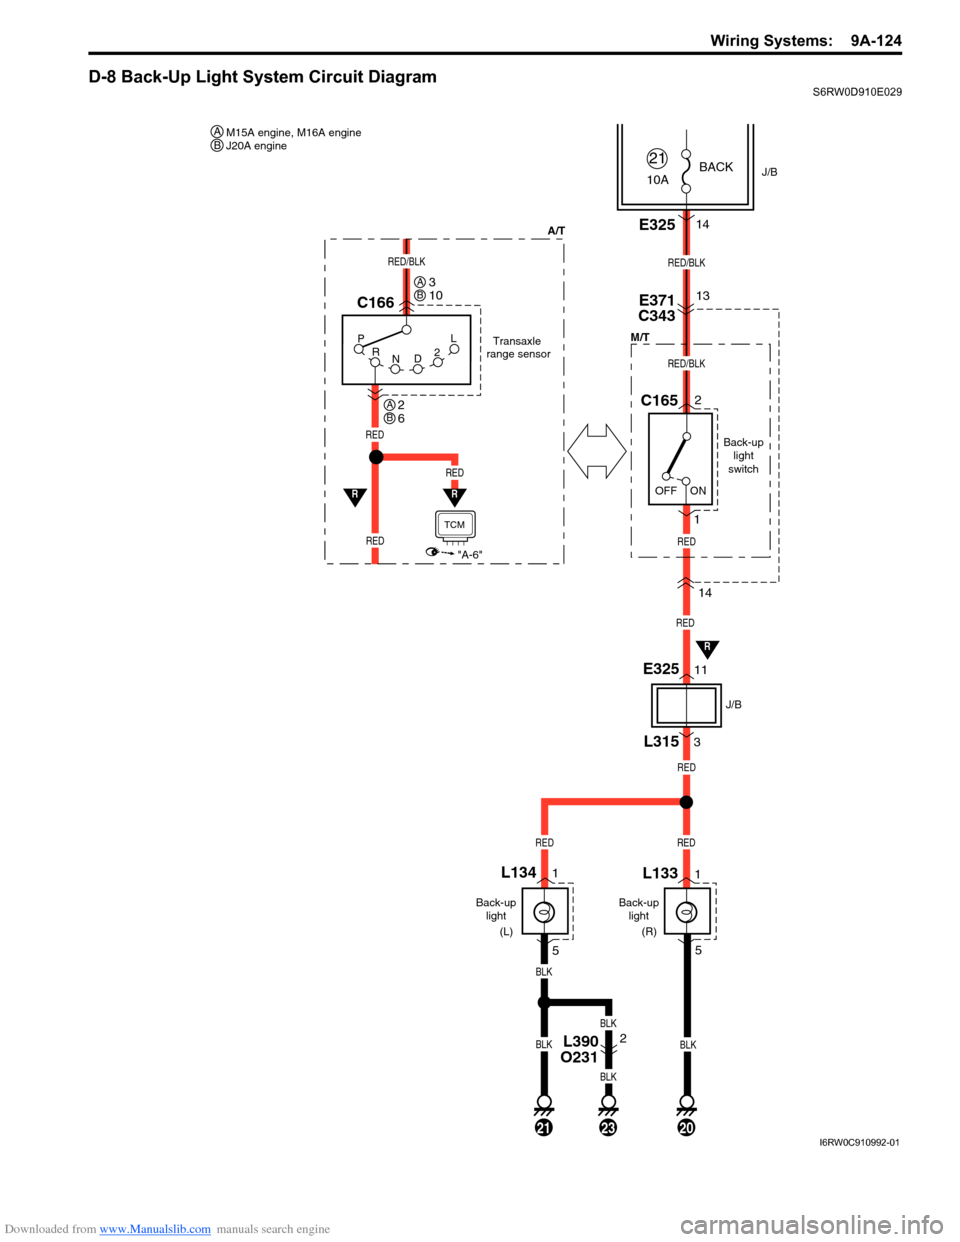 SUZUKI SX4 2006 1.G Service User Guide Downloaded from www.Manualslib.com manuals search engine Wiring Systems:  9A-124
D-8 Back-Up Light System Circuit DiagramS6RW0D910E029
BLKBLK
BLK
2021
BLK
BLK
23
Back-up
light
switch
Back-up
light Bac